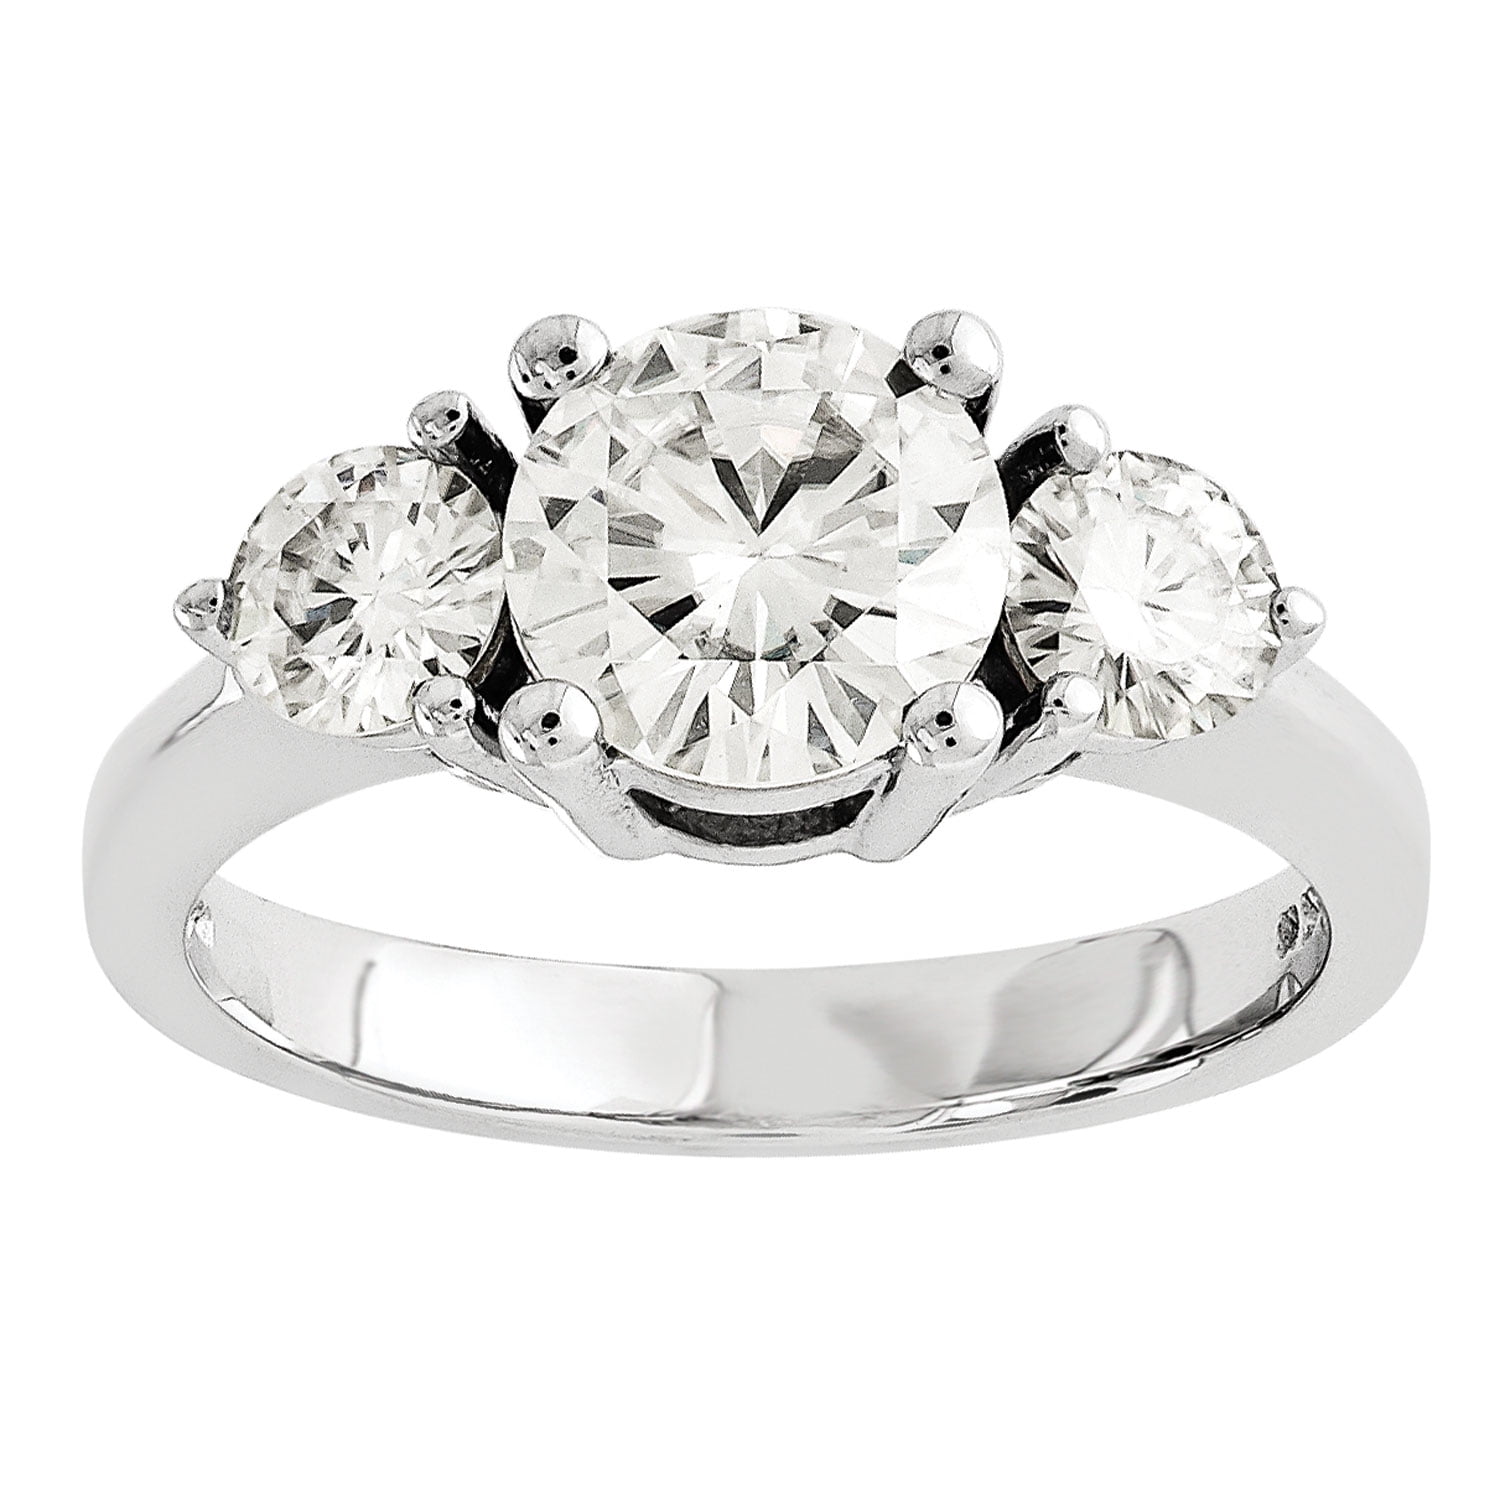 Radiant Fire - Radiant Fire? 14kw Moissanite 3 Stone Ring Round/Low ...